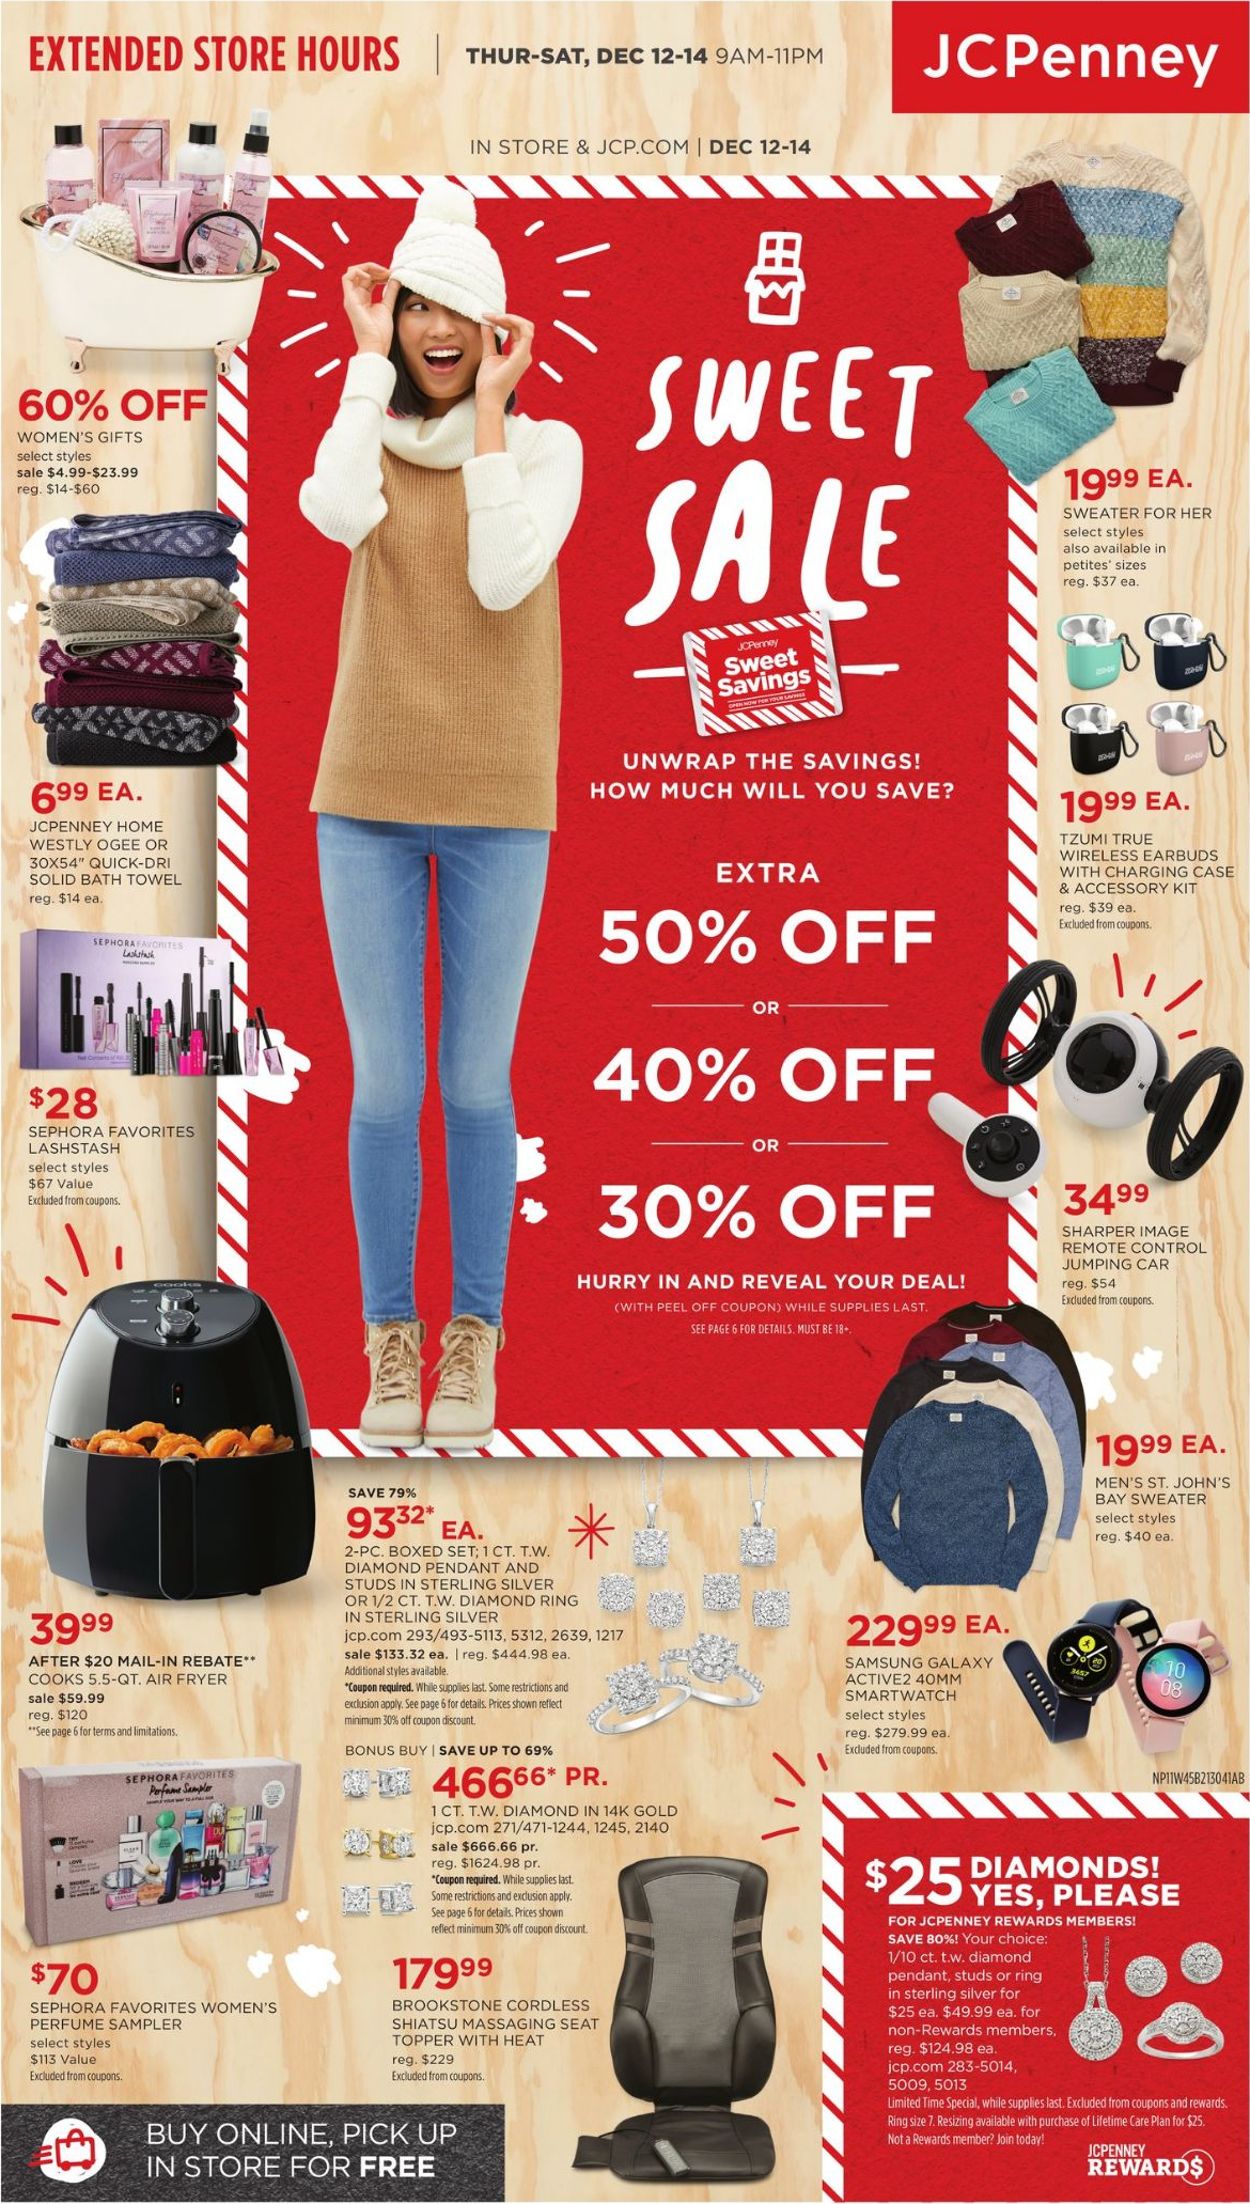 JCPenney - Holidays Ad 2019 Weekly Ad Circular - valid 12/12-12/14/2019